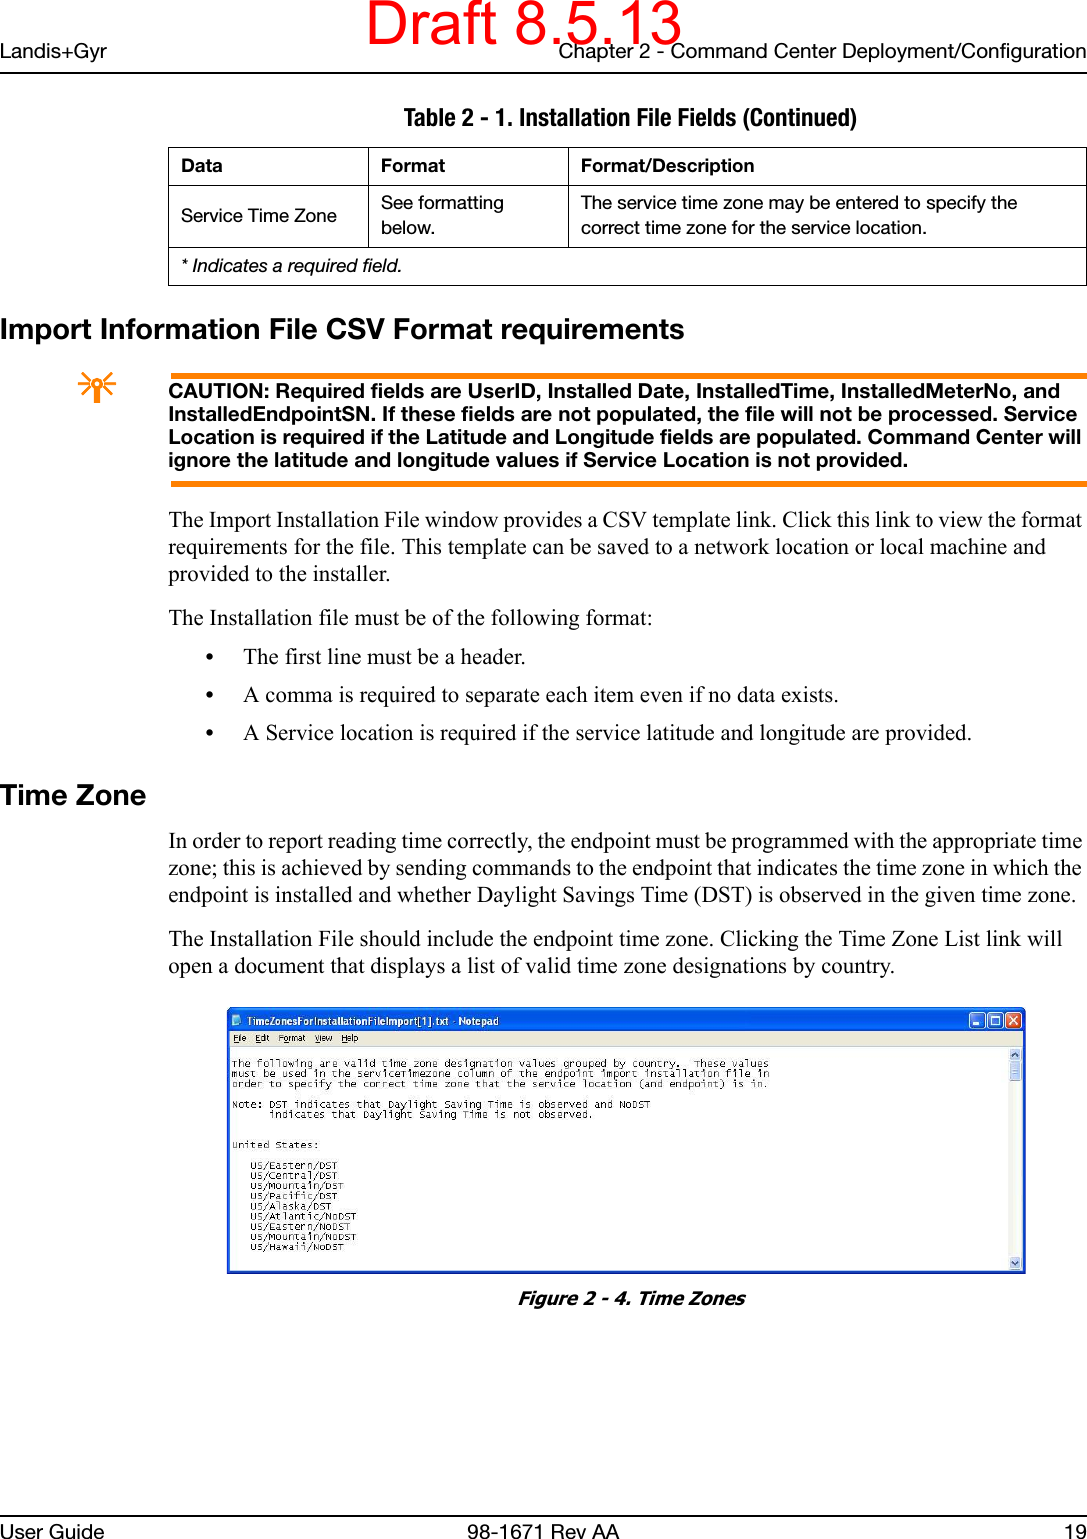 Landis+Gyr Chapter 2 - Command Center Deployment/ConfigurationUser Guide 98-1671 Rev AA 19Import Information File CSV Format requirementsACAUTION: Required fields are UserID, Installed Date, InstalledTime, InstalledMeterNo, and InstalledEndpointSN. If these fields are not populated, the file will not be processed. Service Location is required if the Latitude and Longitude fields are populated. Command Center will ignore the latitude and longitude values if Service Location is not provided.The Import Installation File window provides a CSV template link. Click this link to view the format requirements for the file. This template can be saved to a network location or local machine and provided to the installer.The Installation file must be of the following format:•The first line must be a header.•A comma is required to separate each item even if no data exists.•A Service location is required if the service latitude and longitude are provided.Time ZoneIn order to report reading time correctly, the endpoint must be programmed with the appropriate time zone; this is achieved by sending commands to the endpoint that indicates the time zone in which the endpoint is installed and whether Daylight Savings Time (DST) is observed in the given time zone.The Installation File should include the endpoint time zone. Clicking the Time Zone List link will open a document that displays a list of valid time zone designations by country. Figure 2 - 4. Time ZonesService Time Zone See formatting below.The service time zone may be entered to specify the correct time zone for the service location. Table 2 - 1. Installation File Fields (Continued)Data Format Format/Description* Indicates a required field.Draft 8.5.13